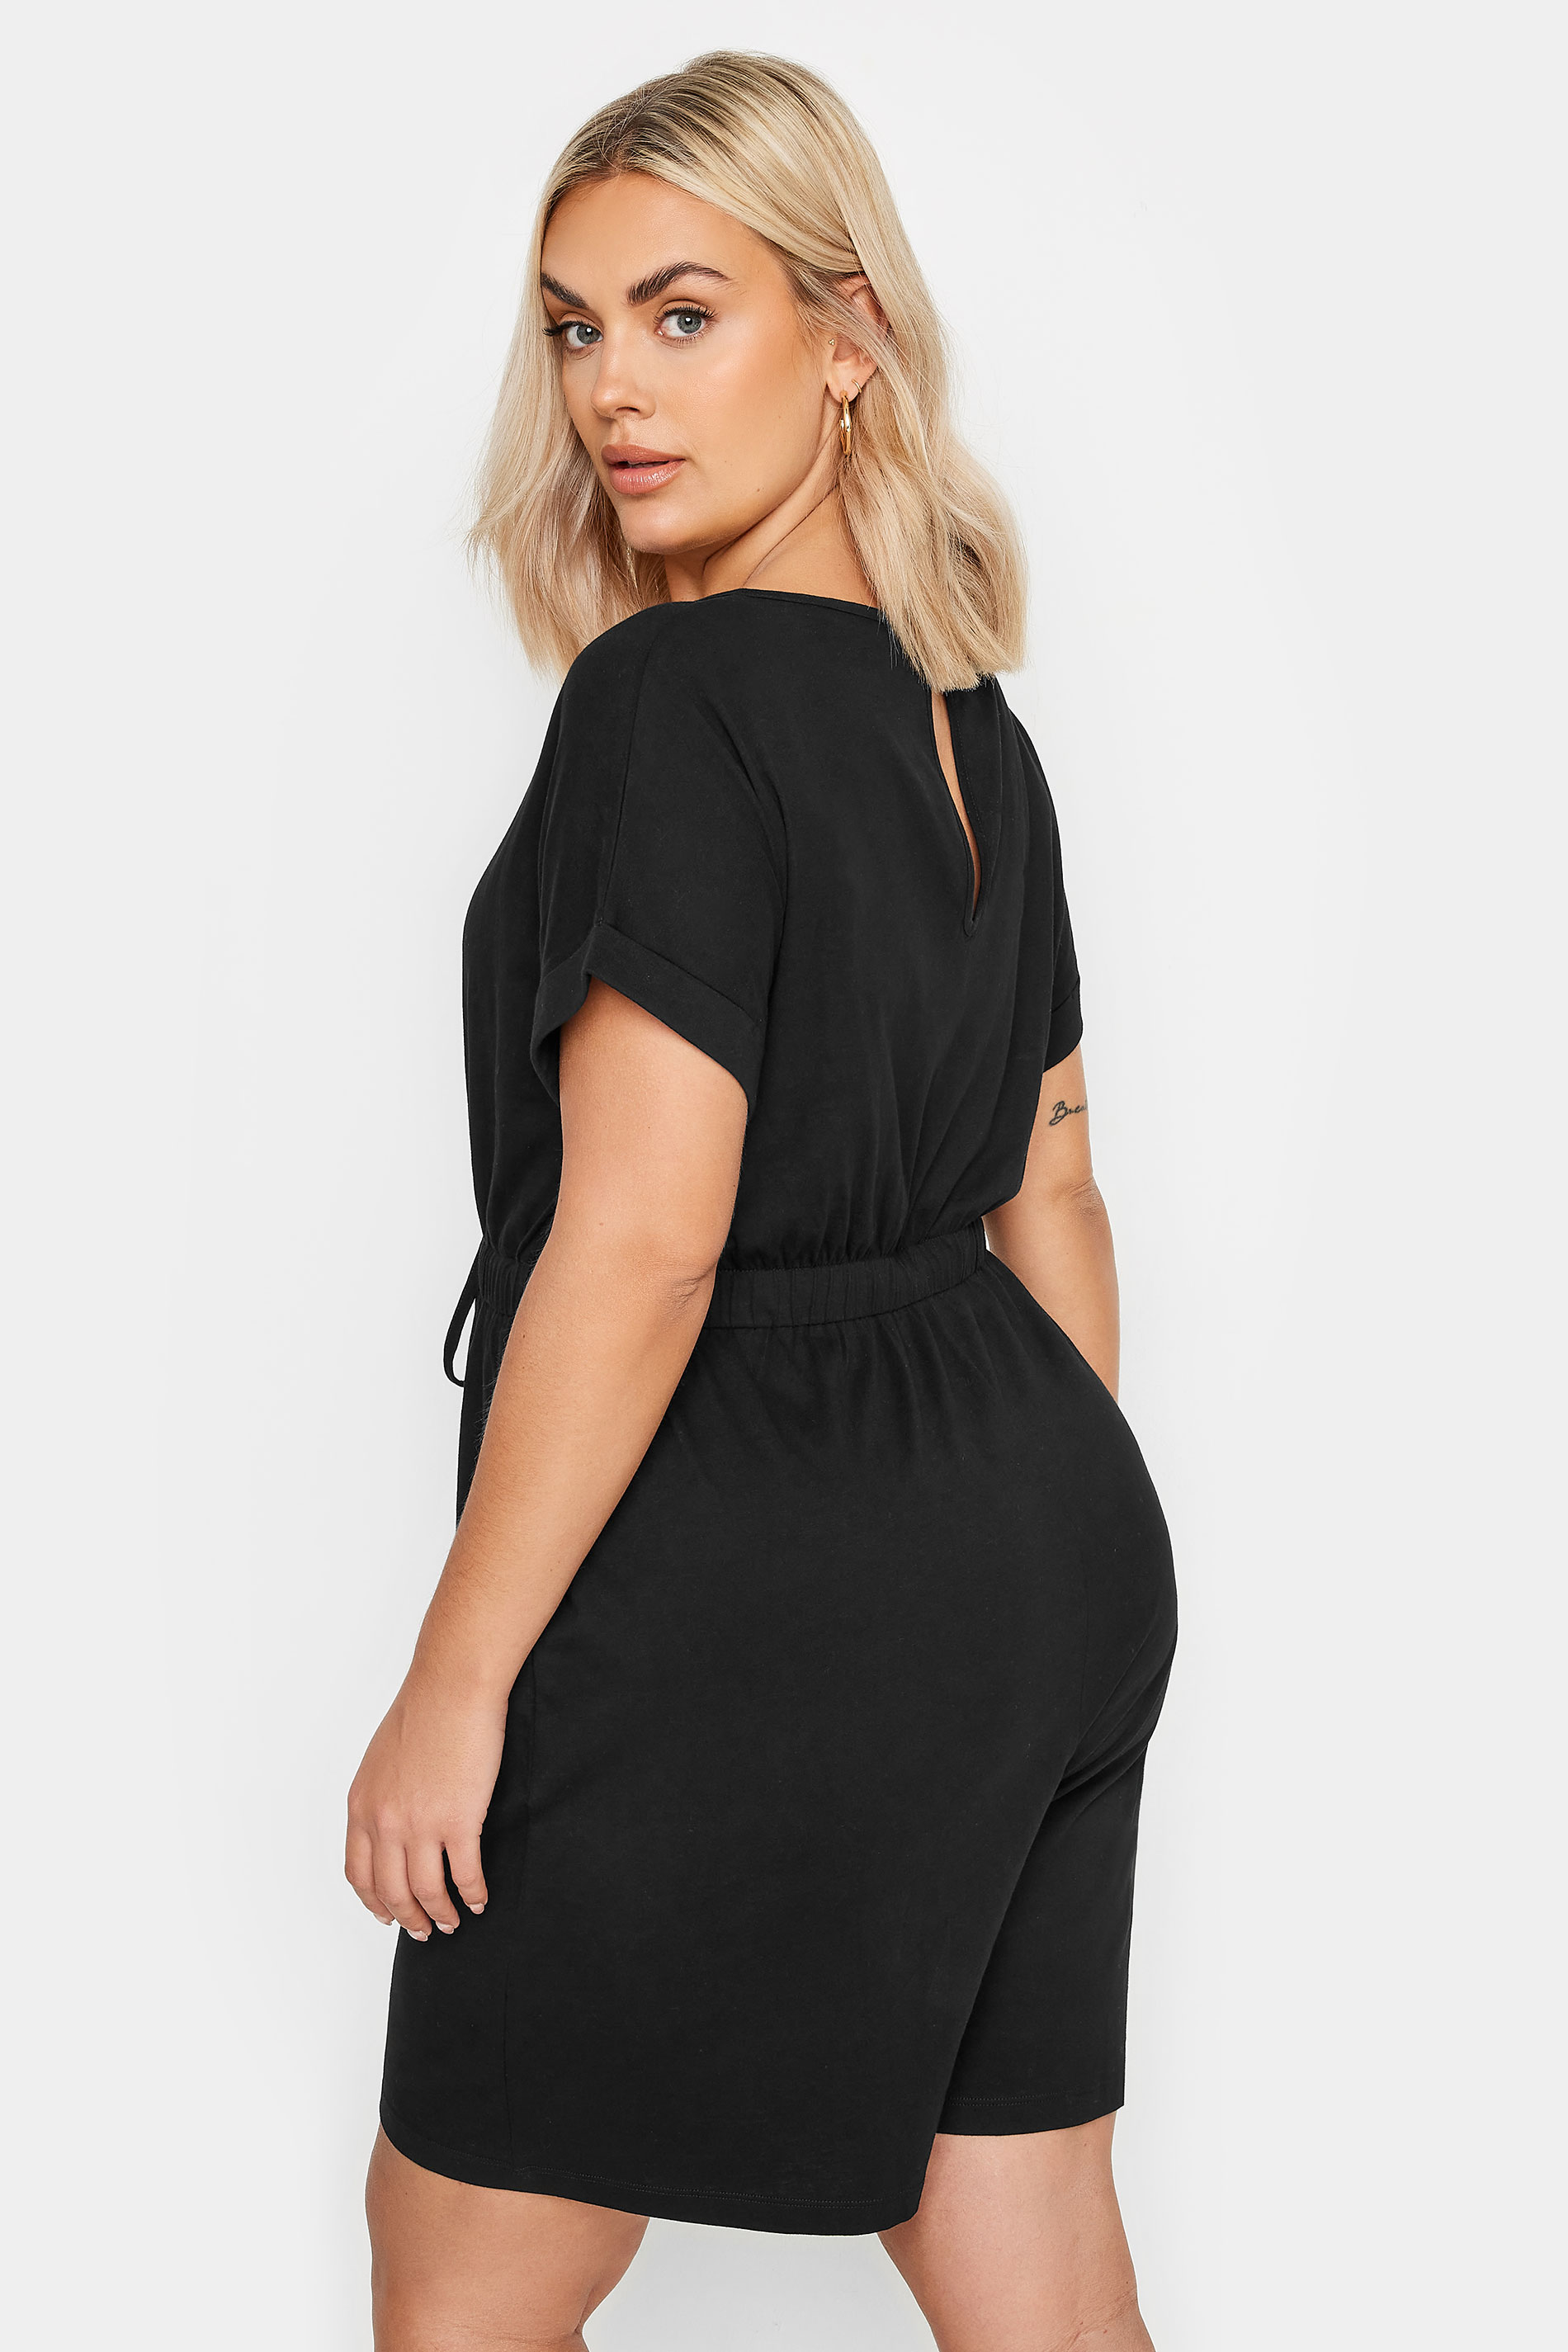 LIMITED COLLECTION Plus Size Black Drawstring Playsuit | Yours Clothing 3